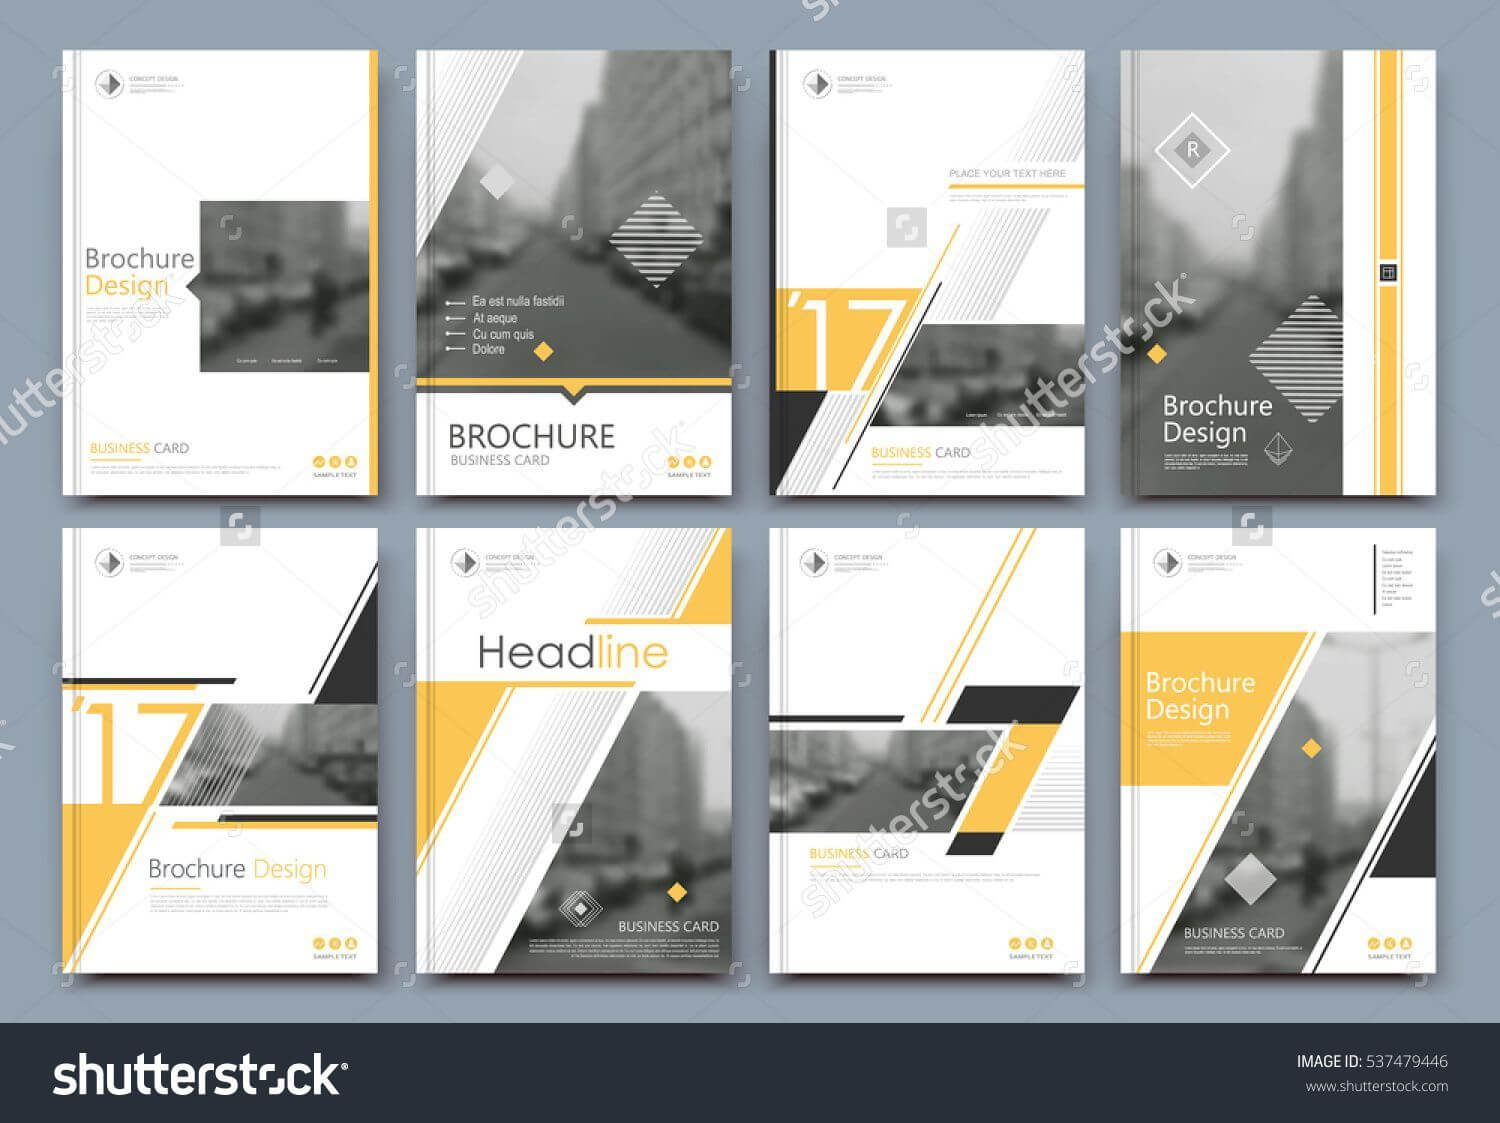 Abstract Binder Layout. White A4 Brochure Cover Design With Fancy Brochure Templates